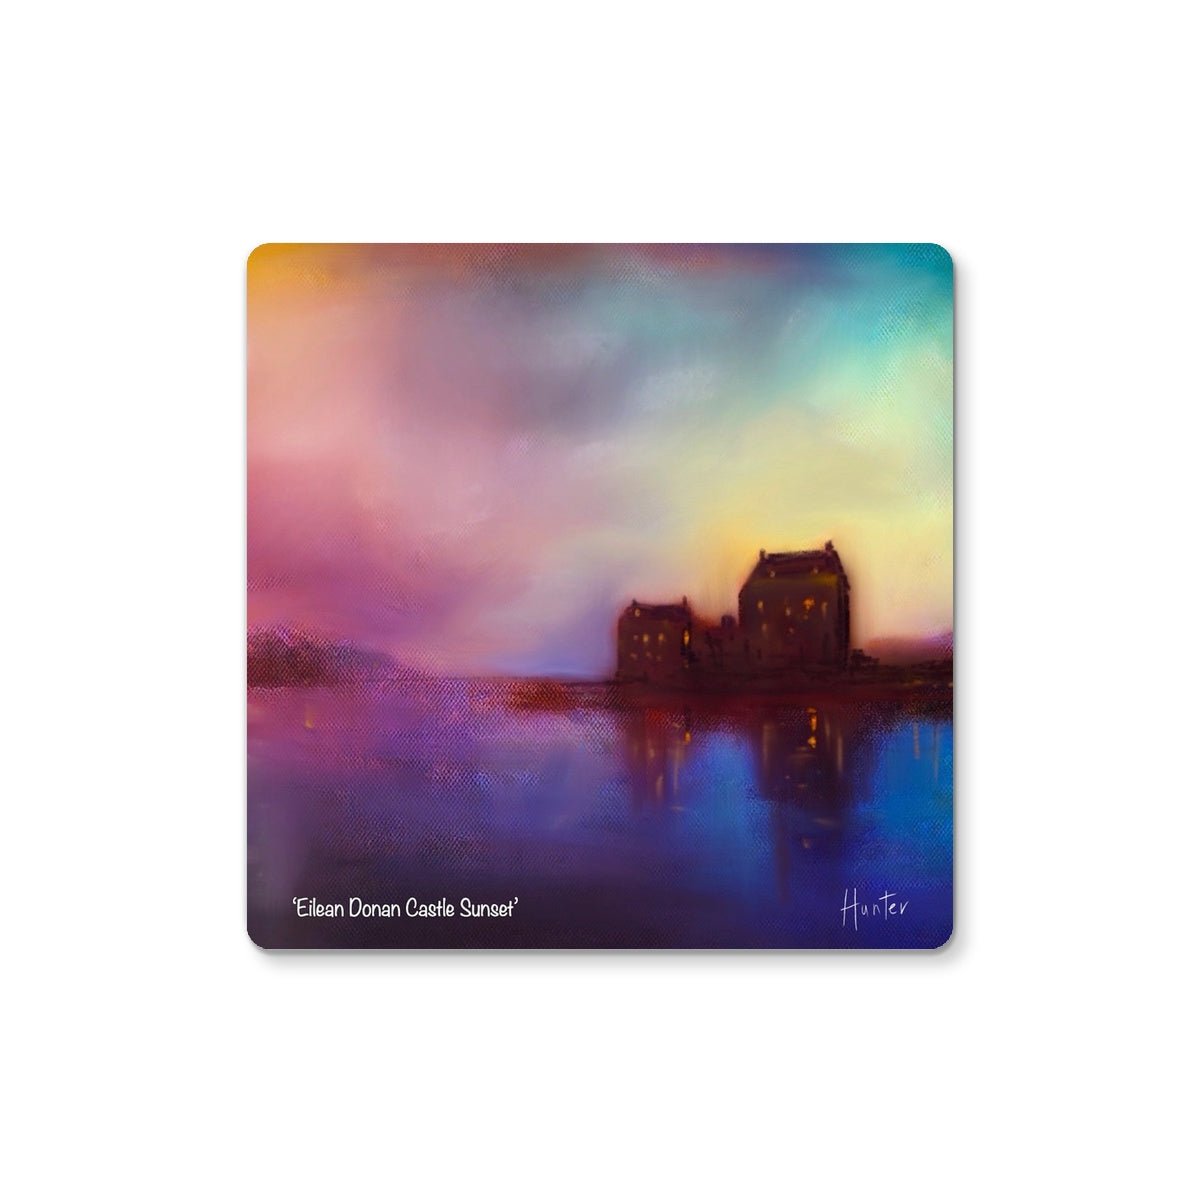 Eilean Donan Castle Sunset Art Gifts Coaster-Coasters-Scottish Castles Art Gallery-Single Coaster-Paintings, Prints, Homeware, Art Gifts From Scotland By Scottish Artist Kevin Hunter